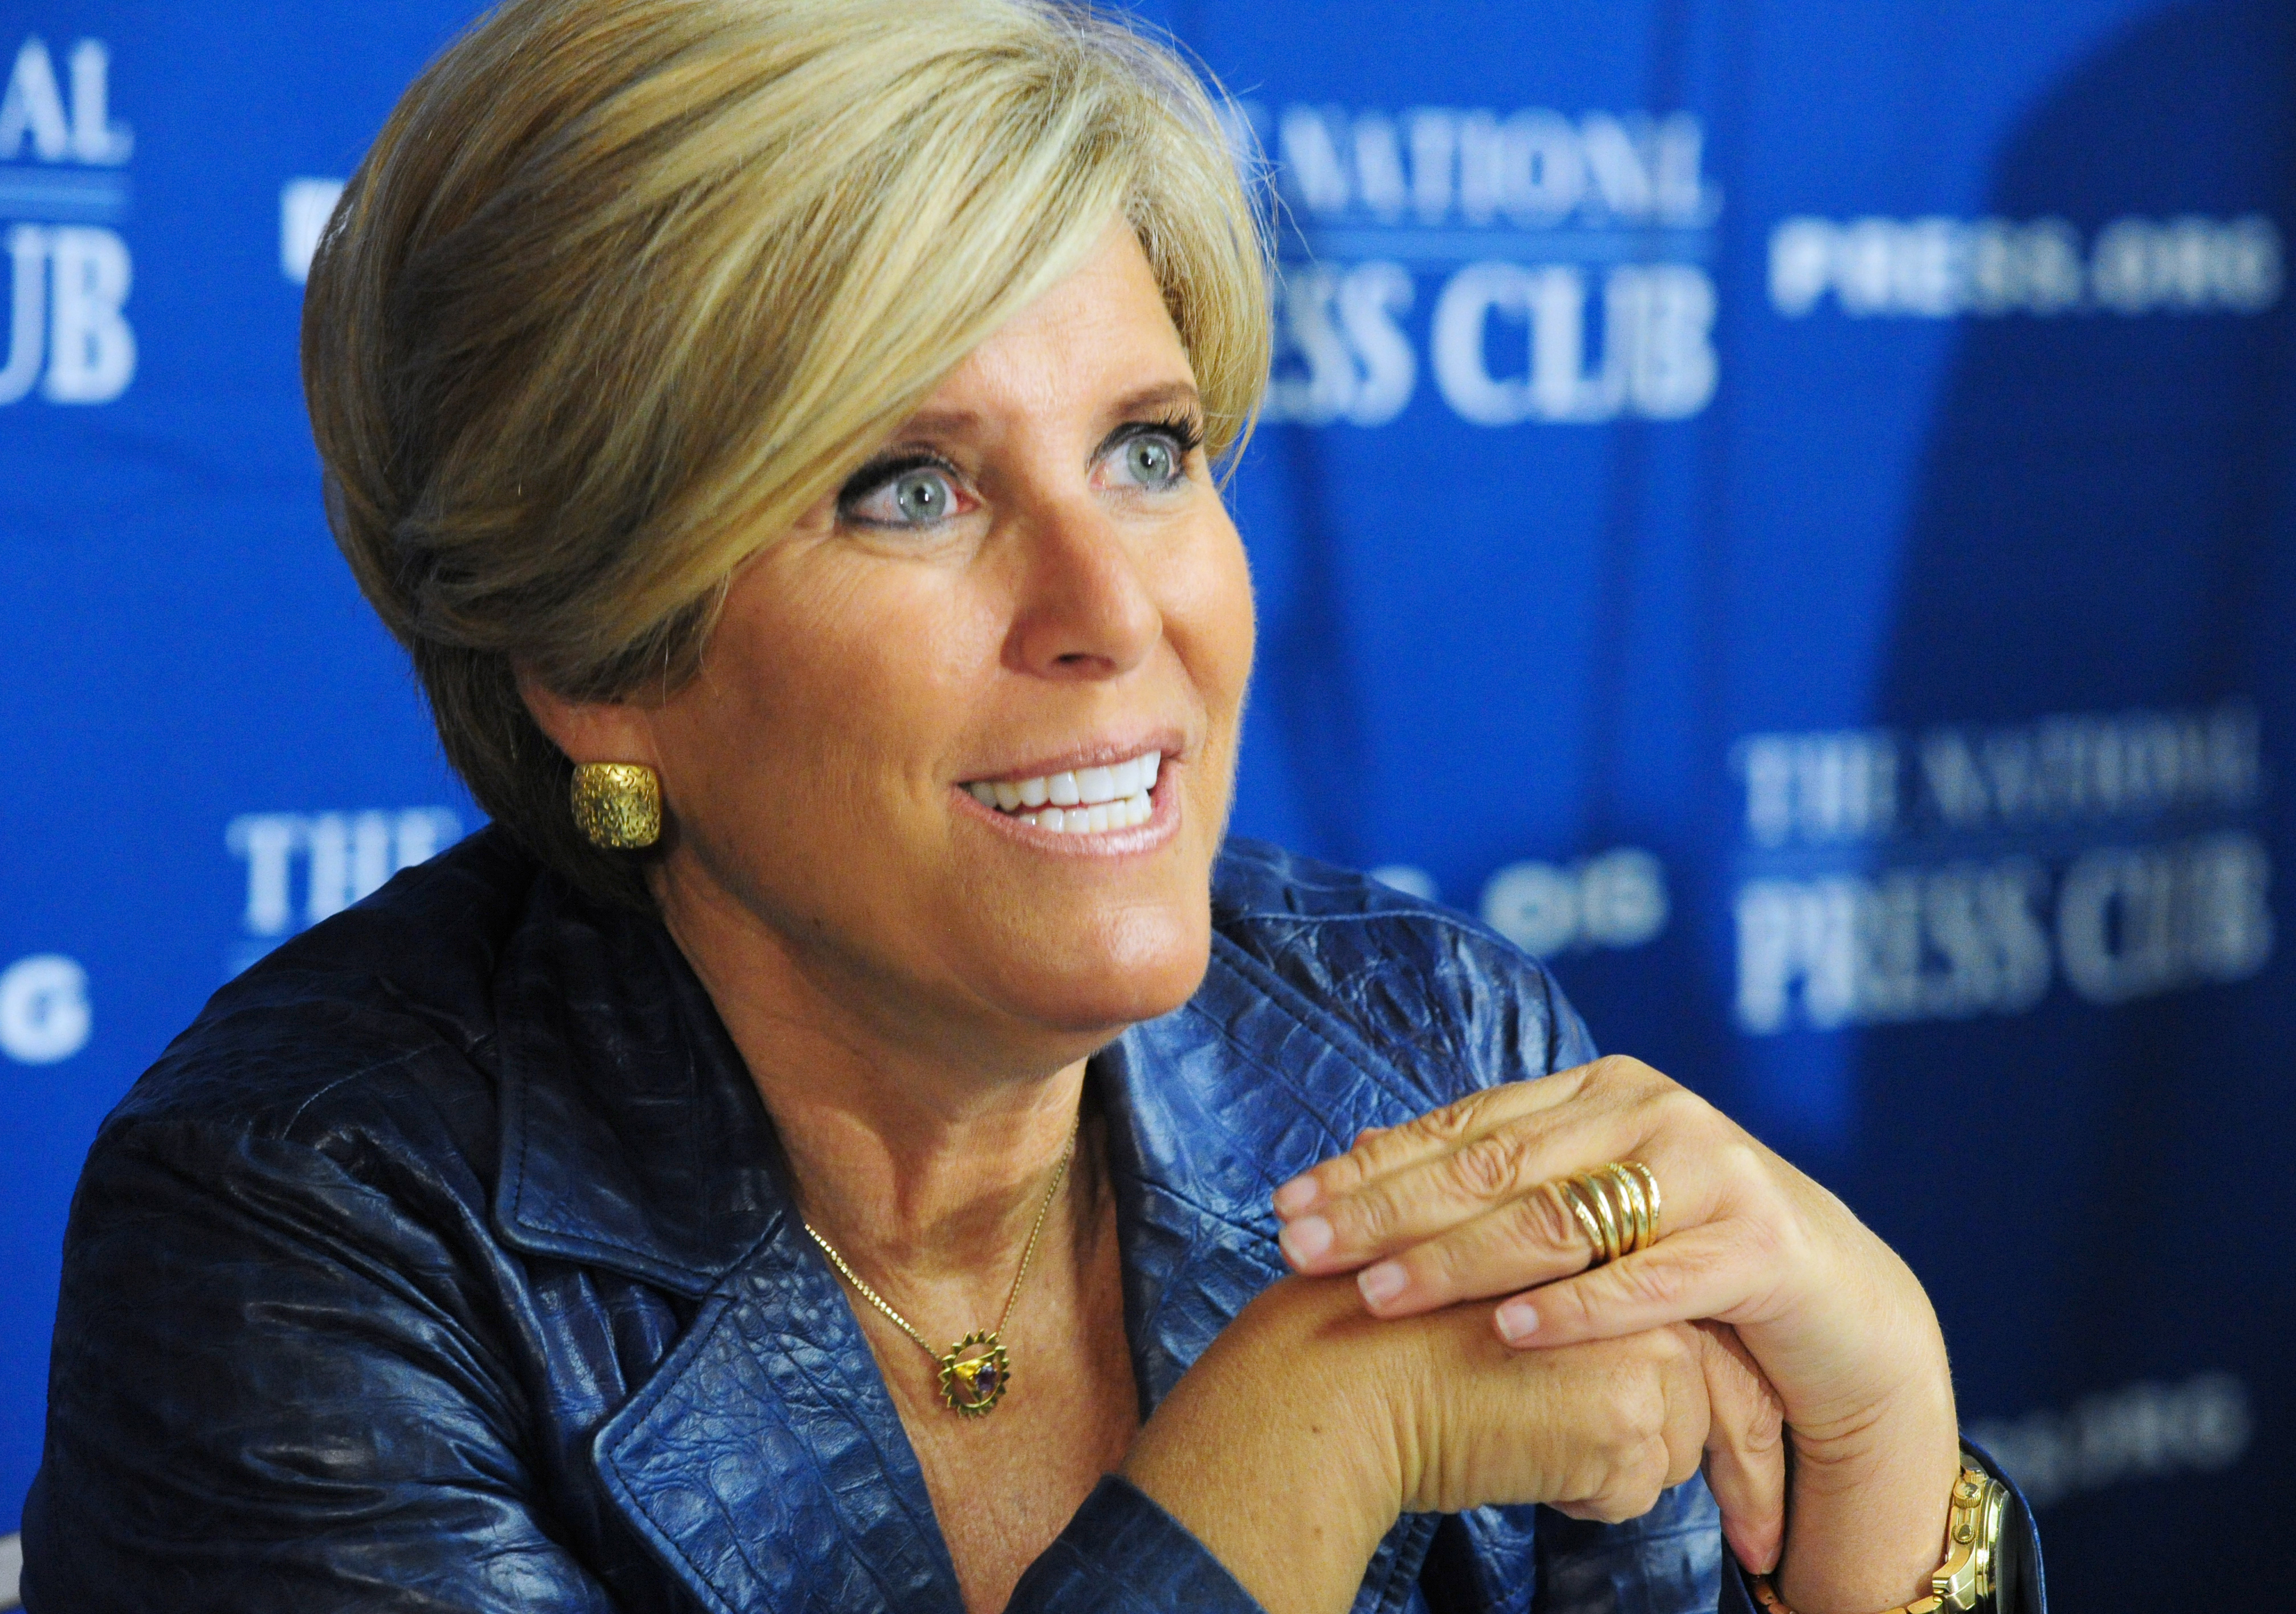 This Is How Much Money You Should Have Saved, According to Suze Orman